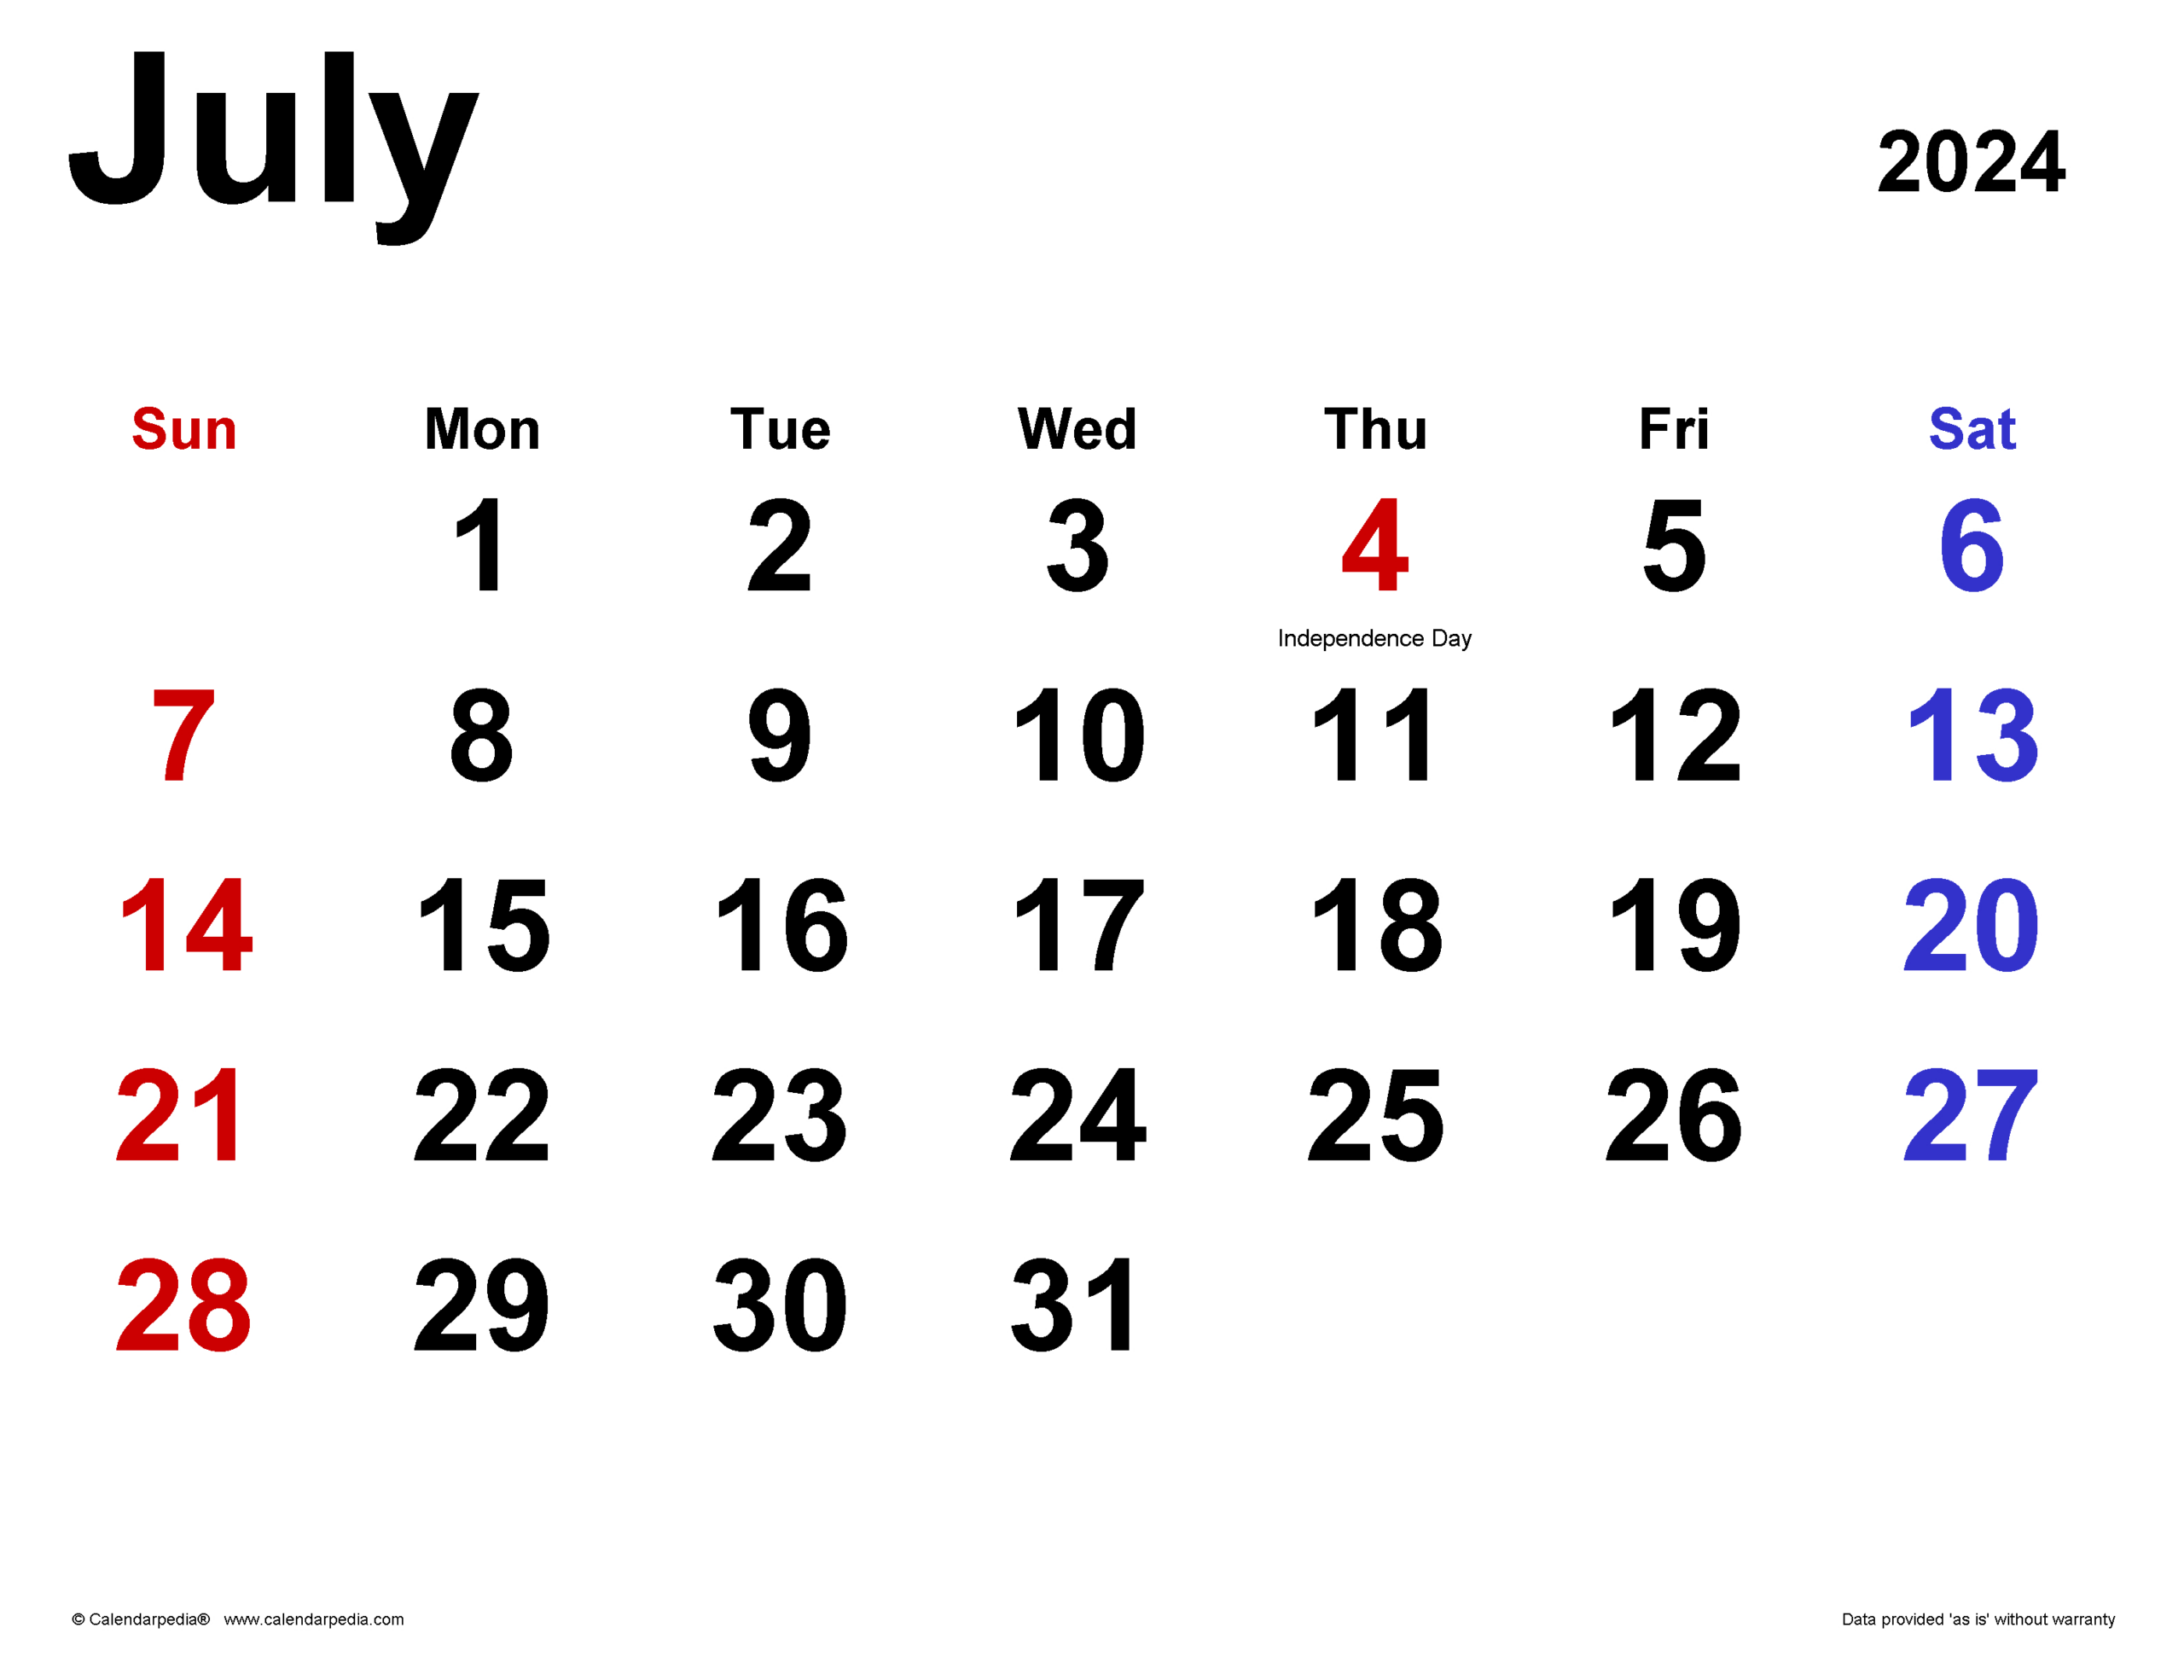 July 2024 Calendar | Templates For Word, Excel And Pdf for Calendar Days July 2024